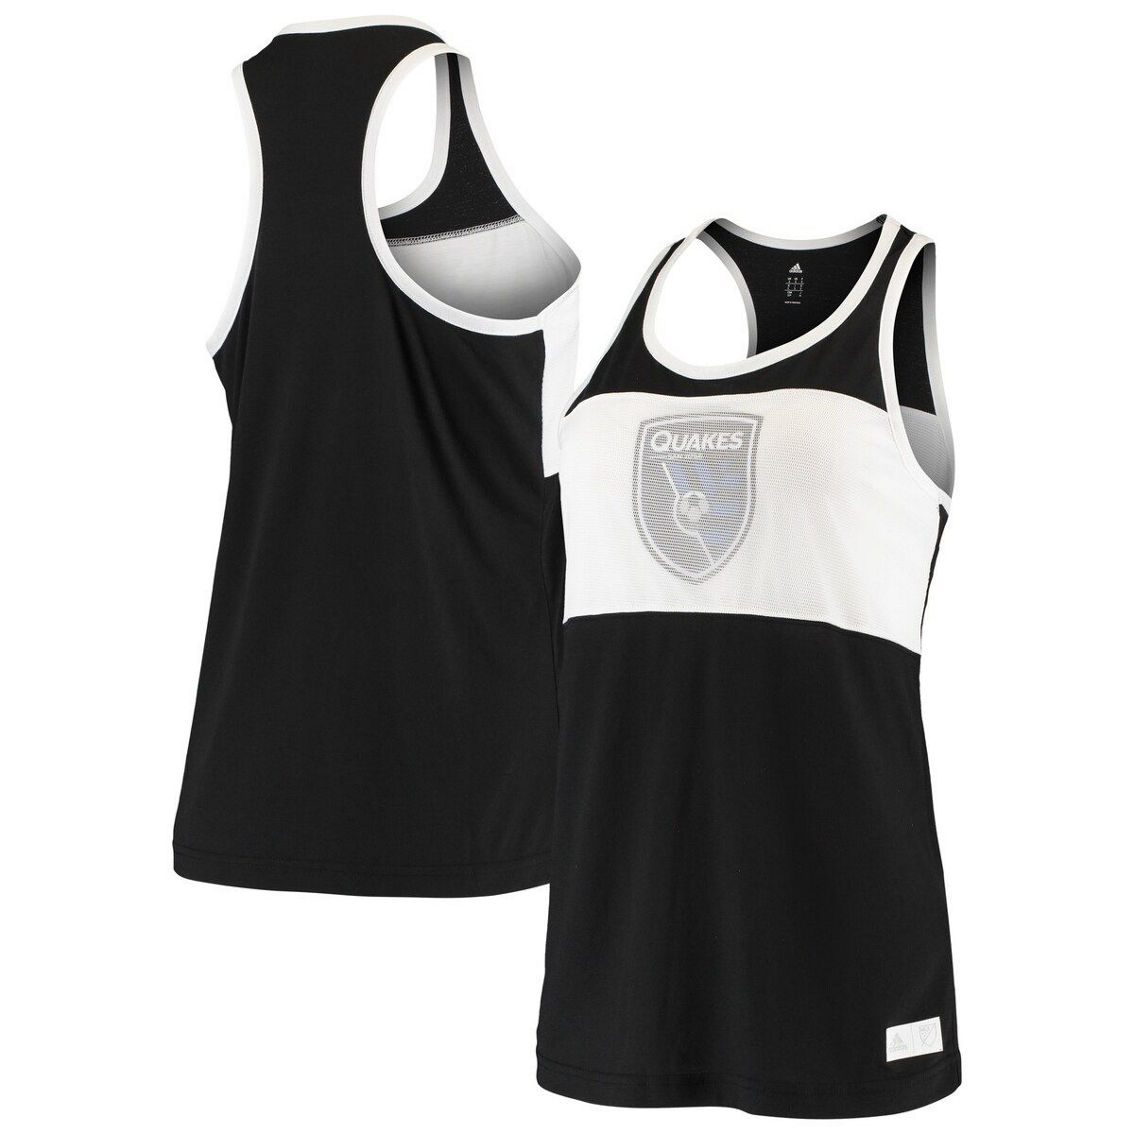 adidas Women's Black San Jose Earthquakes Finished Tank Top - Image 2 of 4